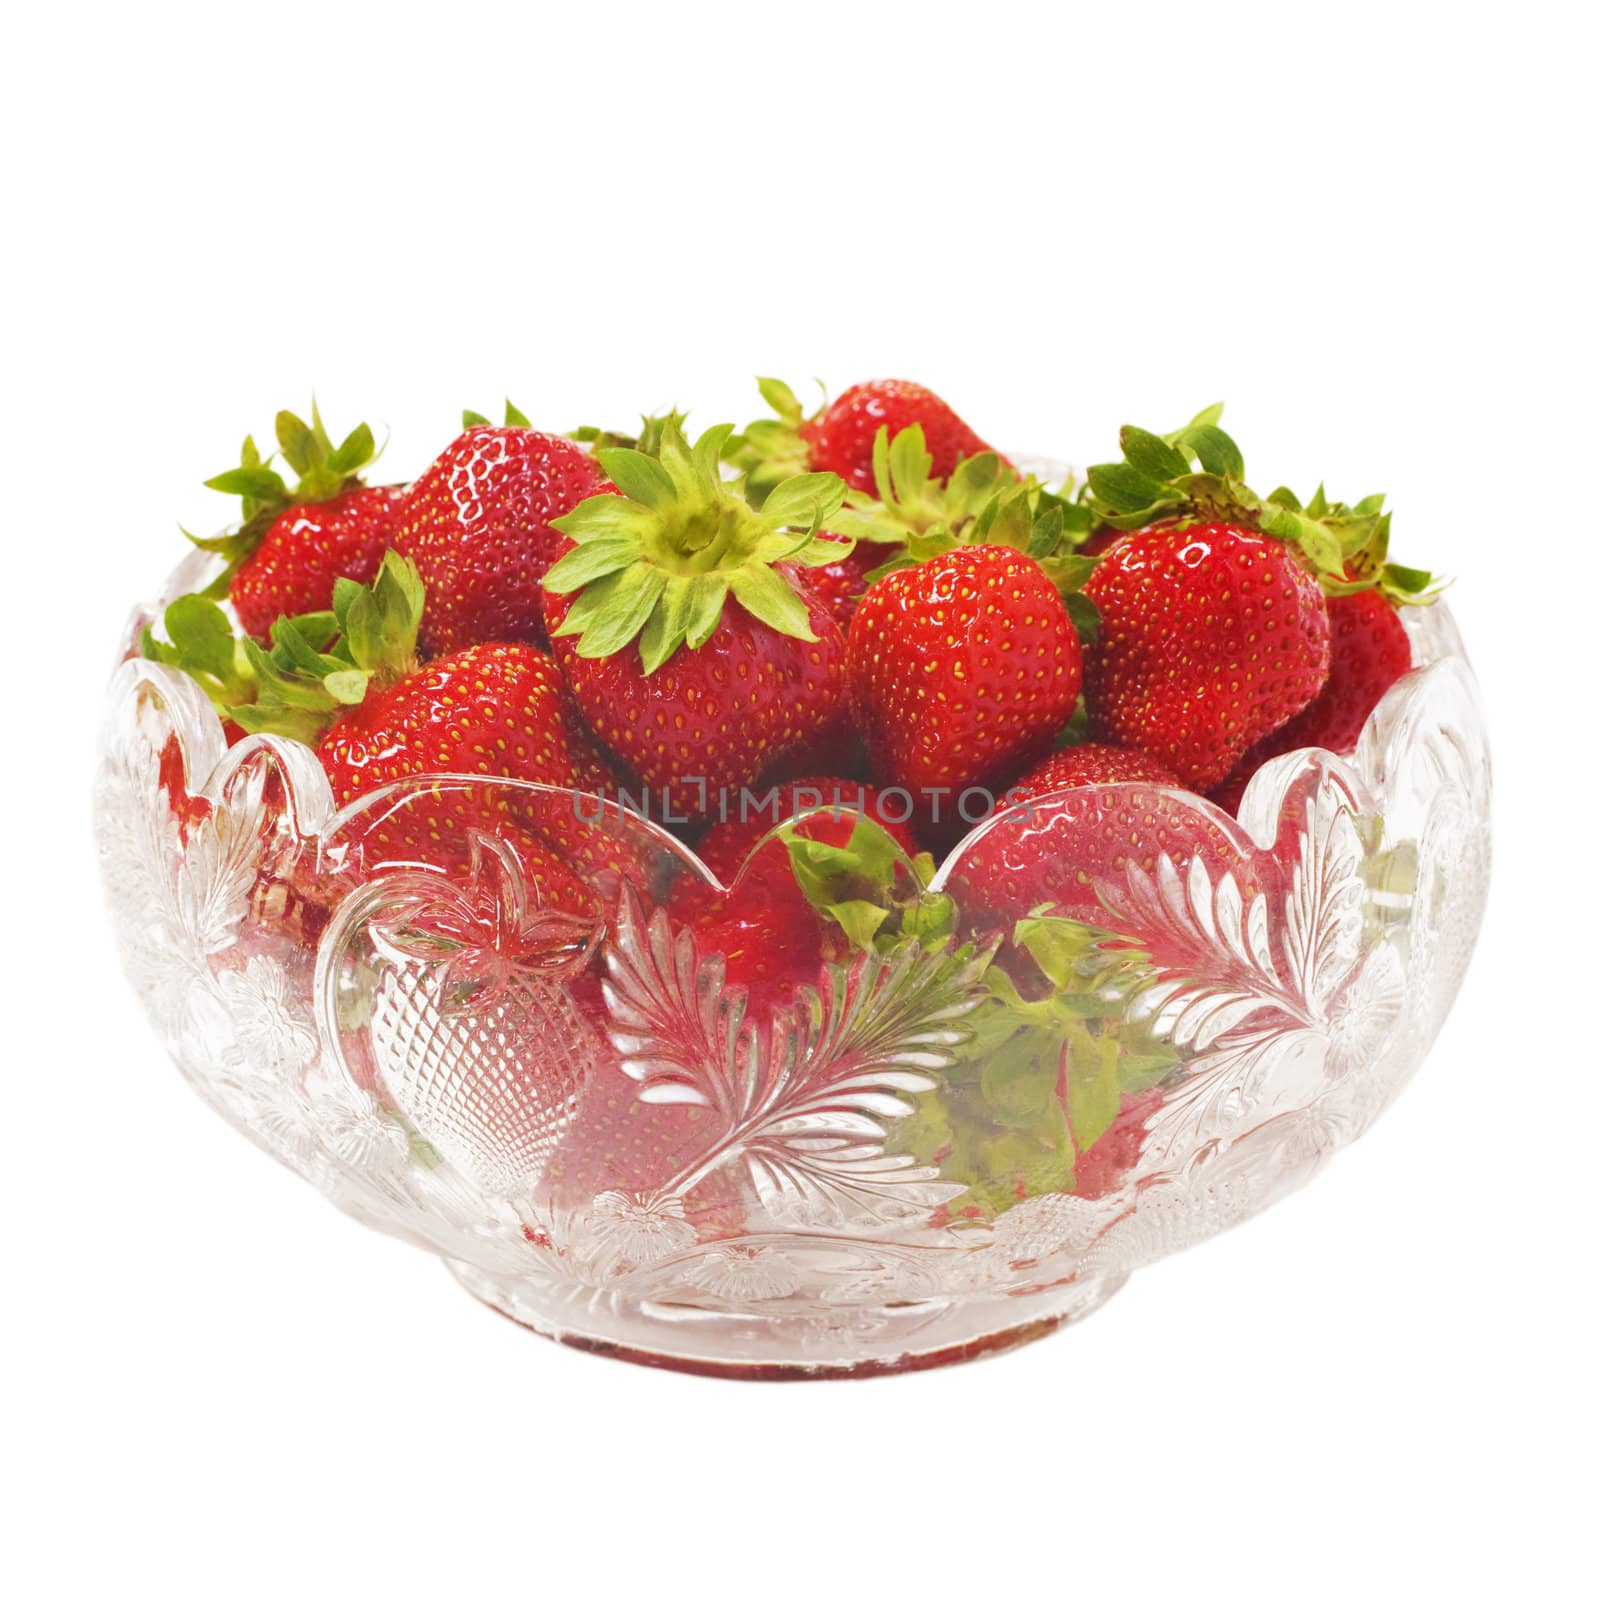 An antique glass bowl filled with summer's bounty, luscious strawberries. Isolated on white.